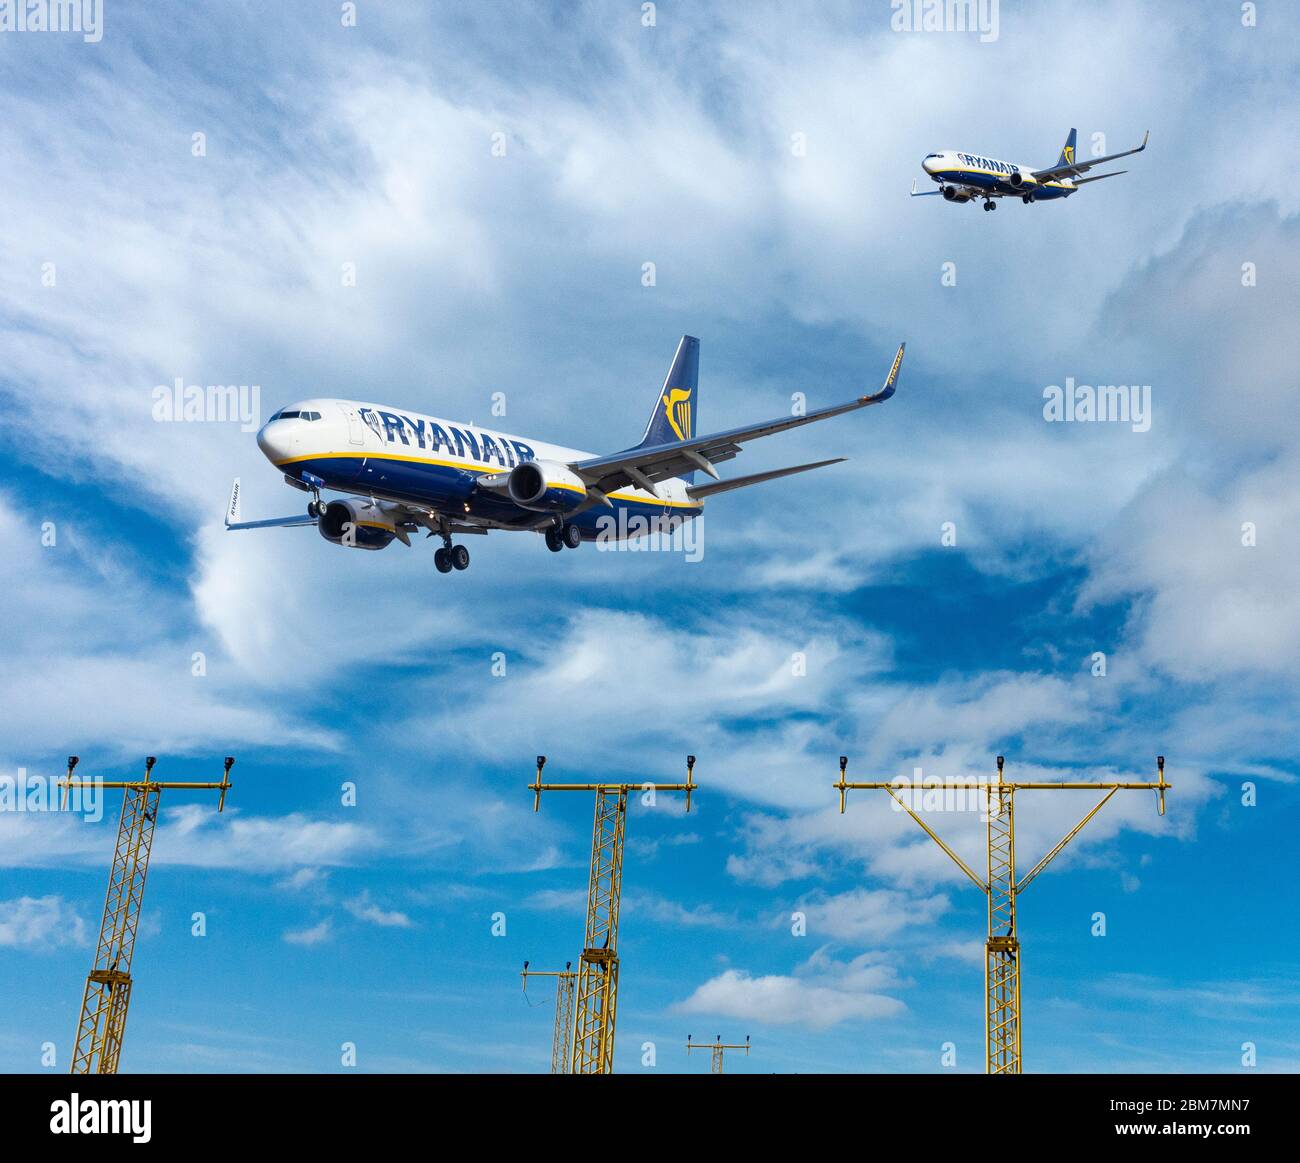 Two Ryanair aircraft, airplanes on landing approach. Airline industry, air traffic control... Stock Photo